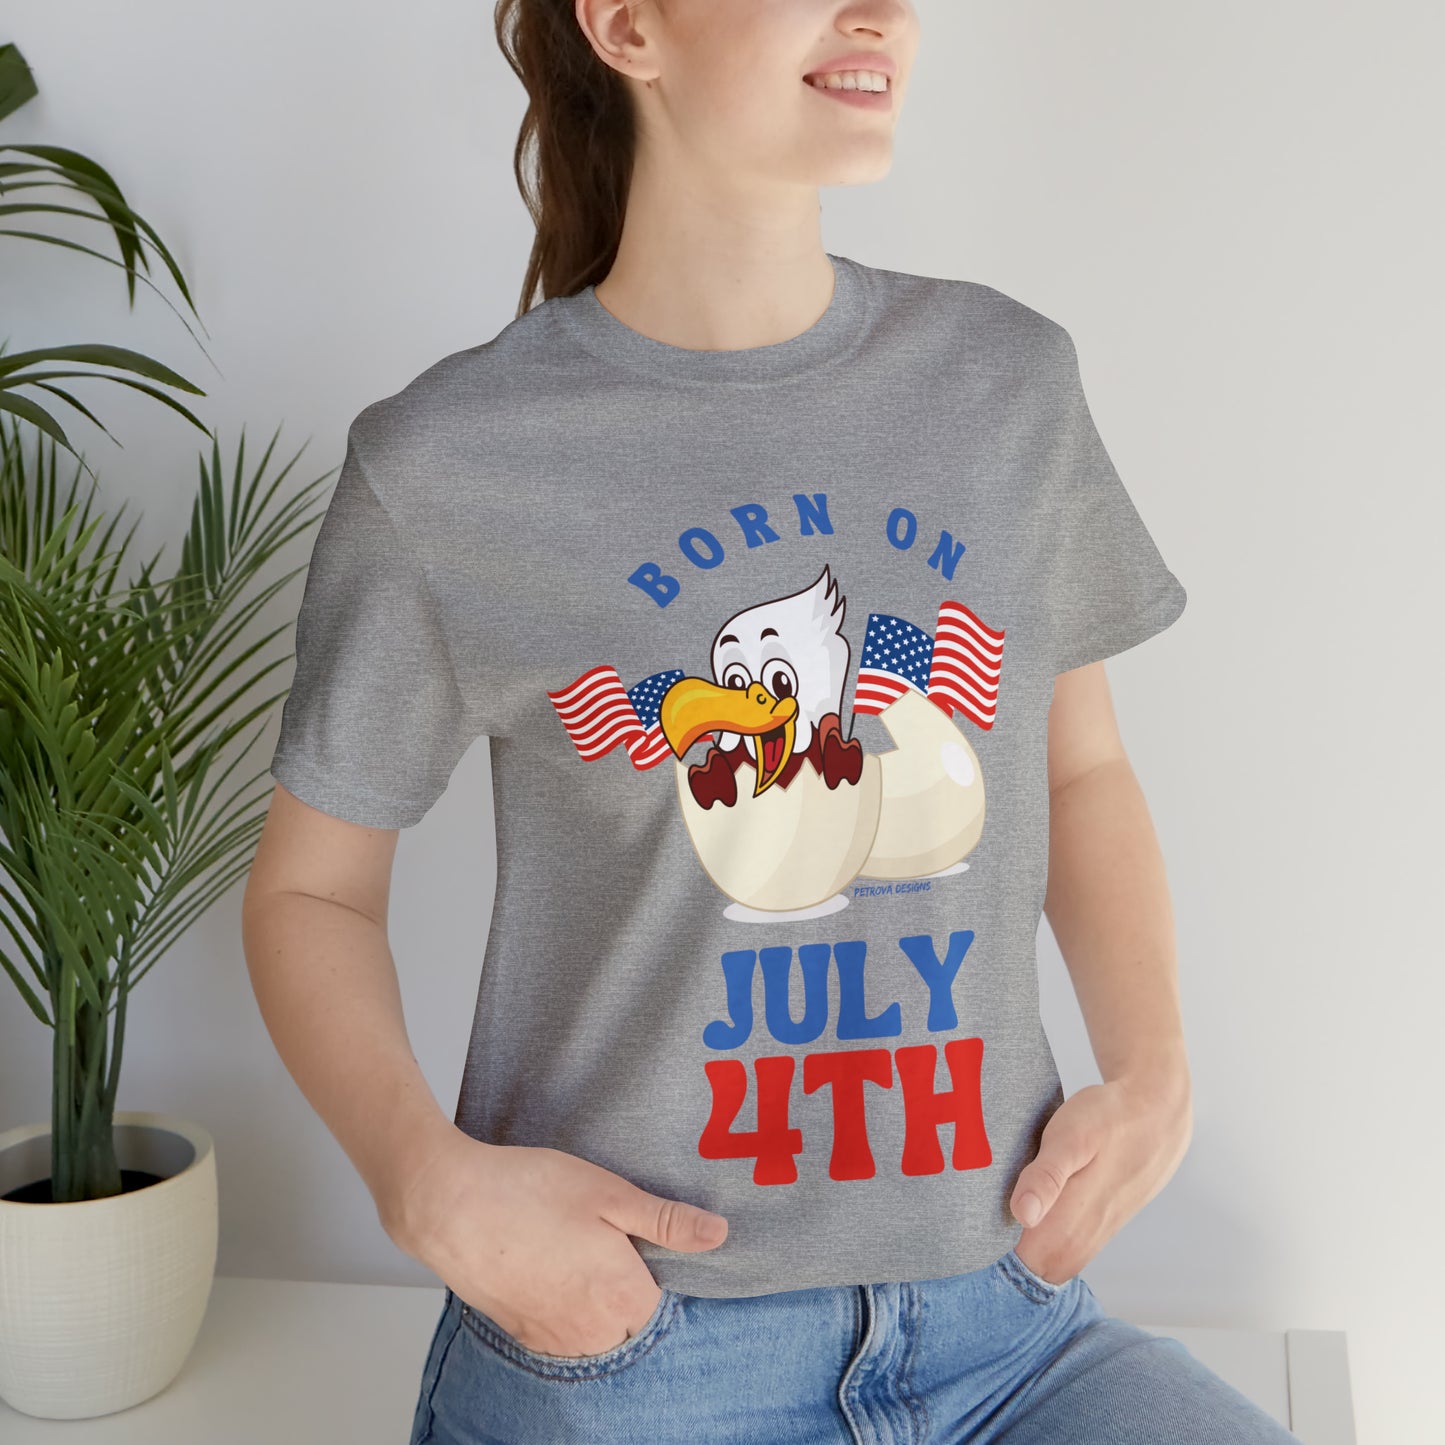 Athletic Heather T-Shirt Tshirt Design Gift for Friend and Family Short Sleeved Shirt 4th of July Independence Day Petrova Designs